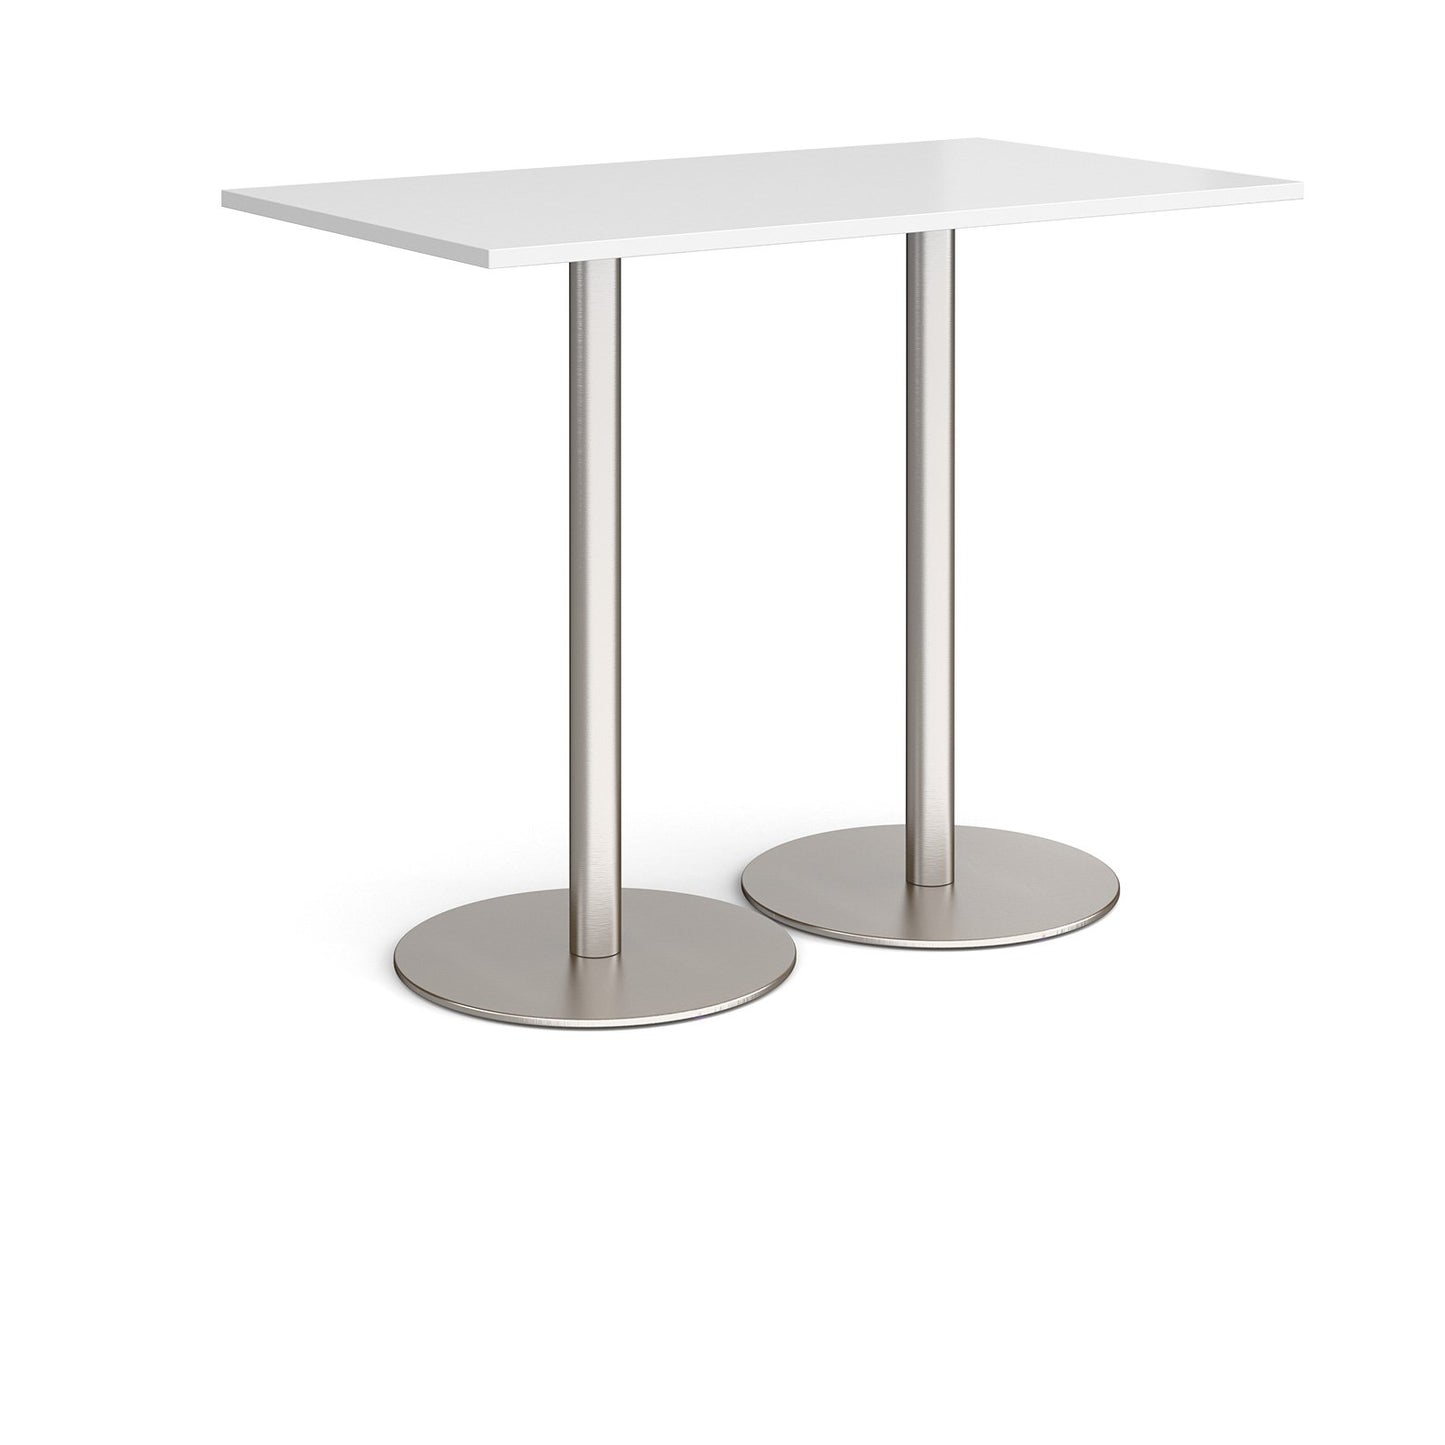 Monza rectangular poseur table with round bases